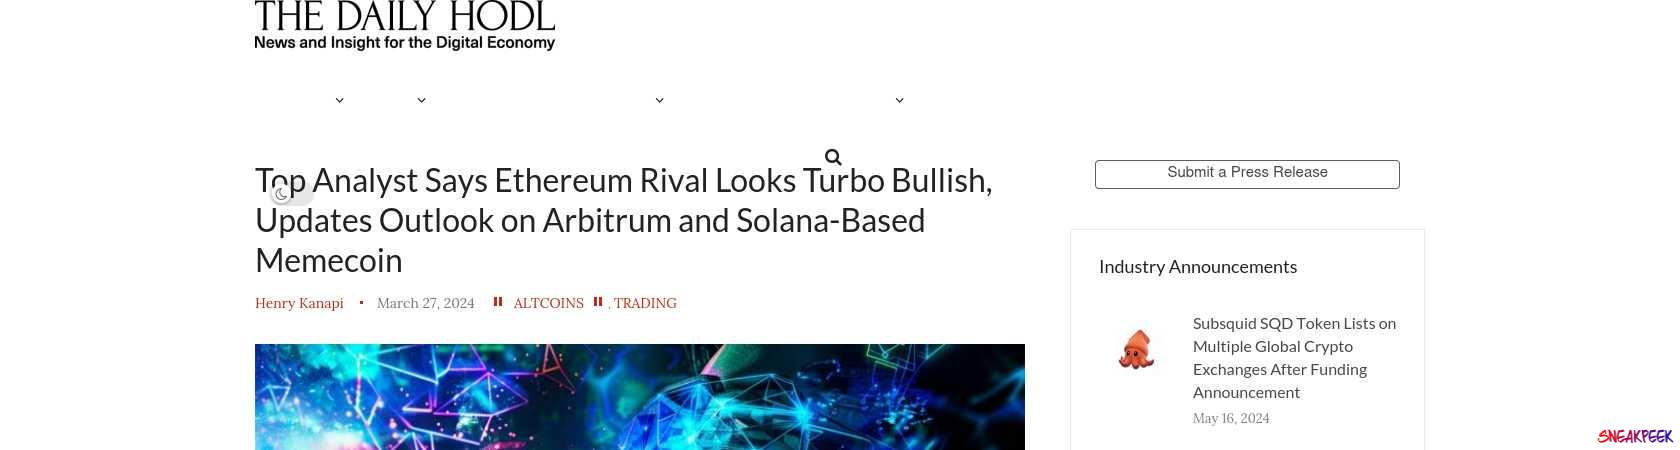 Read the full Article:  ⭲ Top Analyst Says Ethereum Rival Looks Turbo Bullish, Updates Outlook on Arbitrum and Solana-Based Memecoin